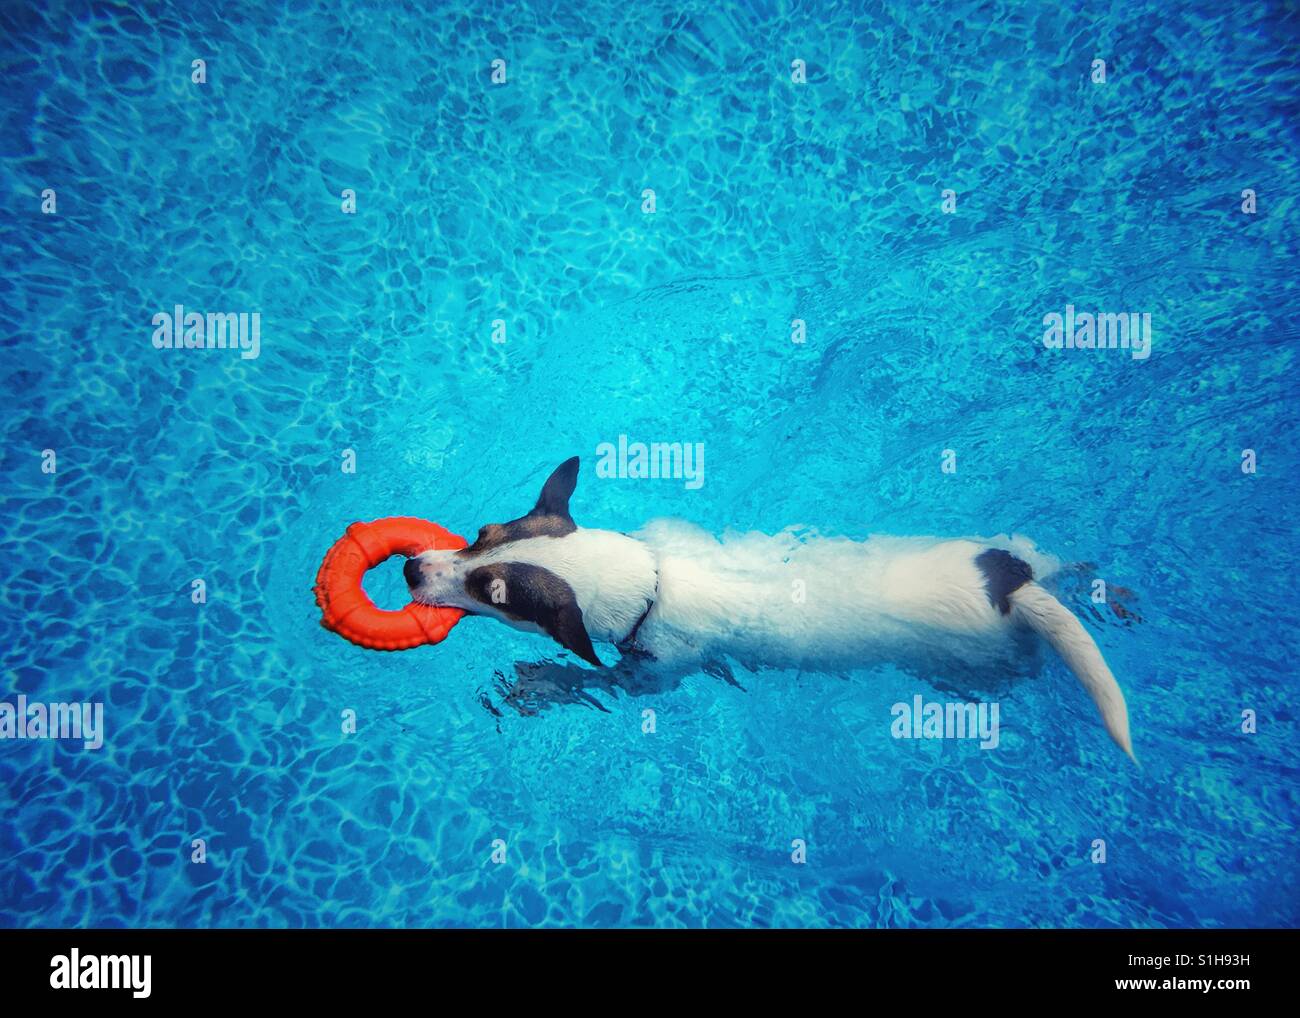 Jack Russell Terrier dog swimming in an outdoor swimming pool while carrying a toy lifesaver ring. Photographed from above. Space for copy. Stock Photo